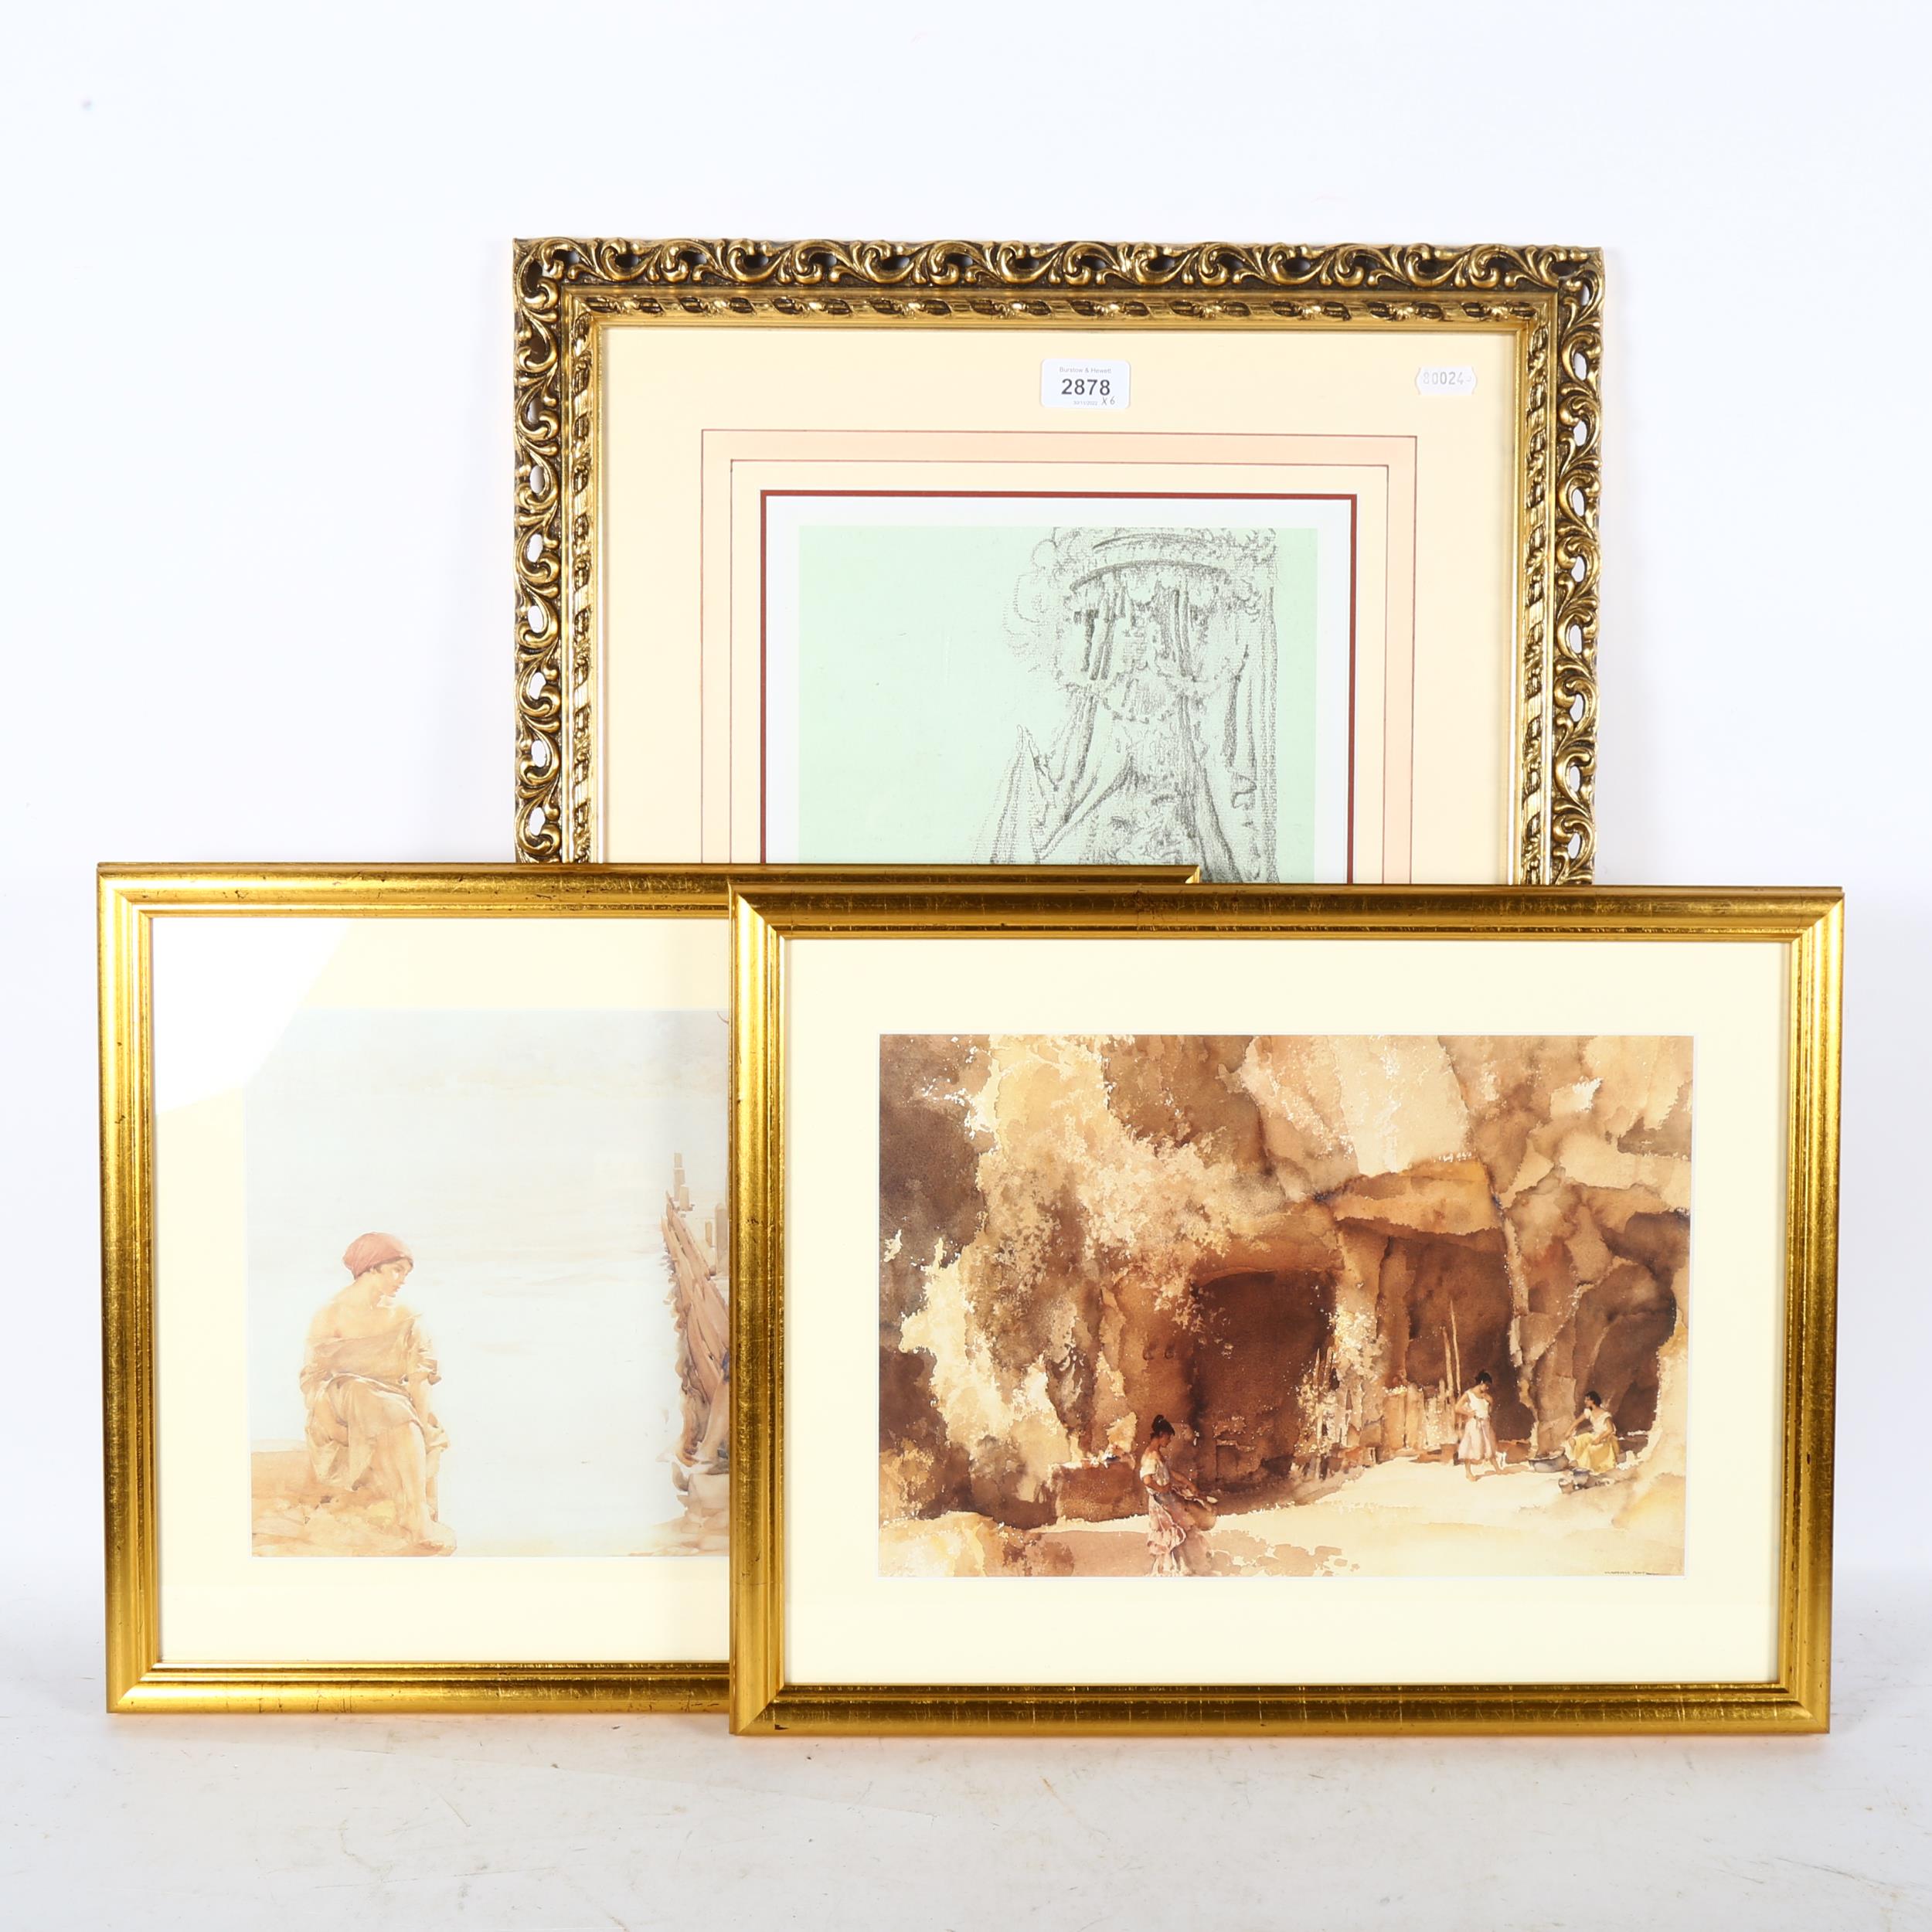 A set of 5 William Russell Flint prints, all framed, and another by the same artist, Madam Du